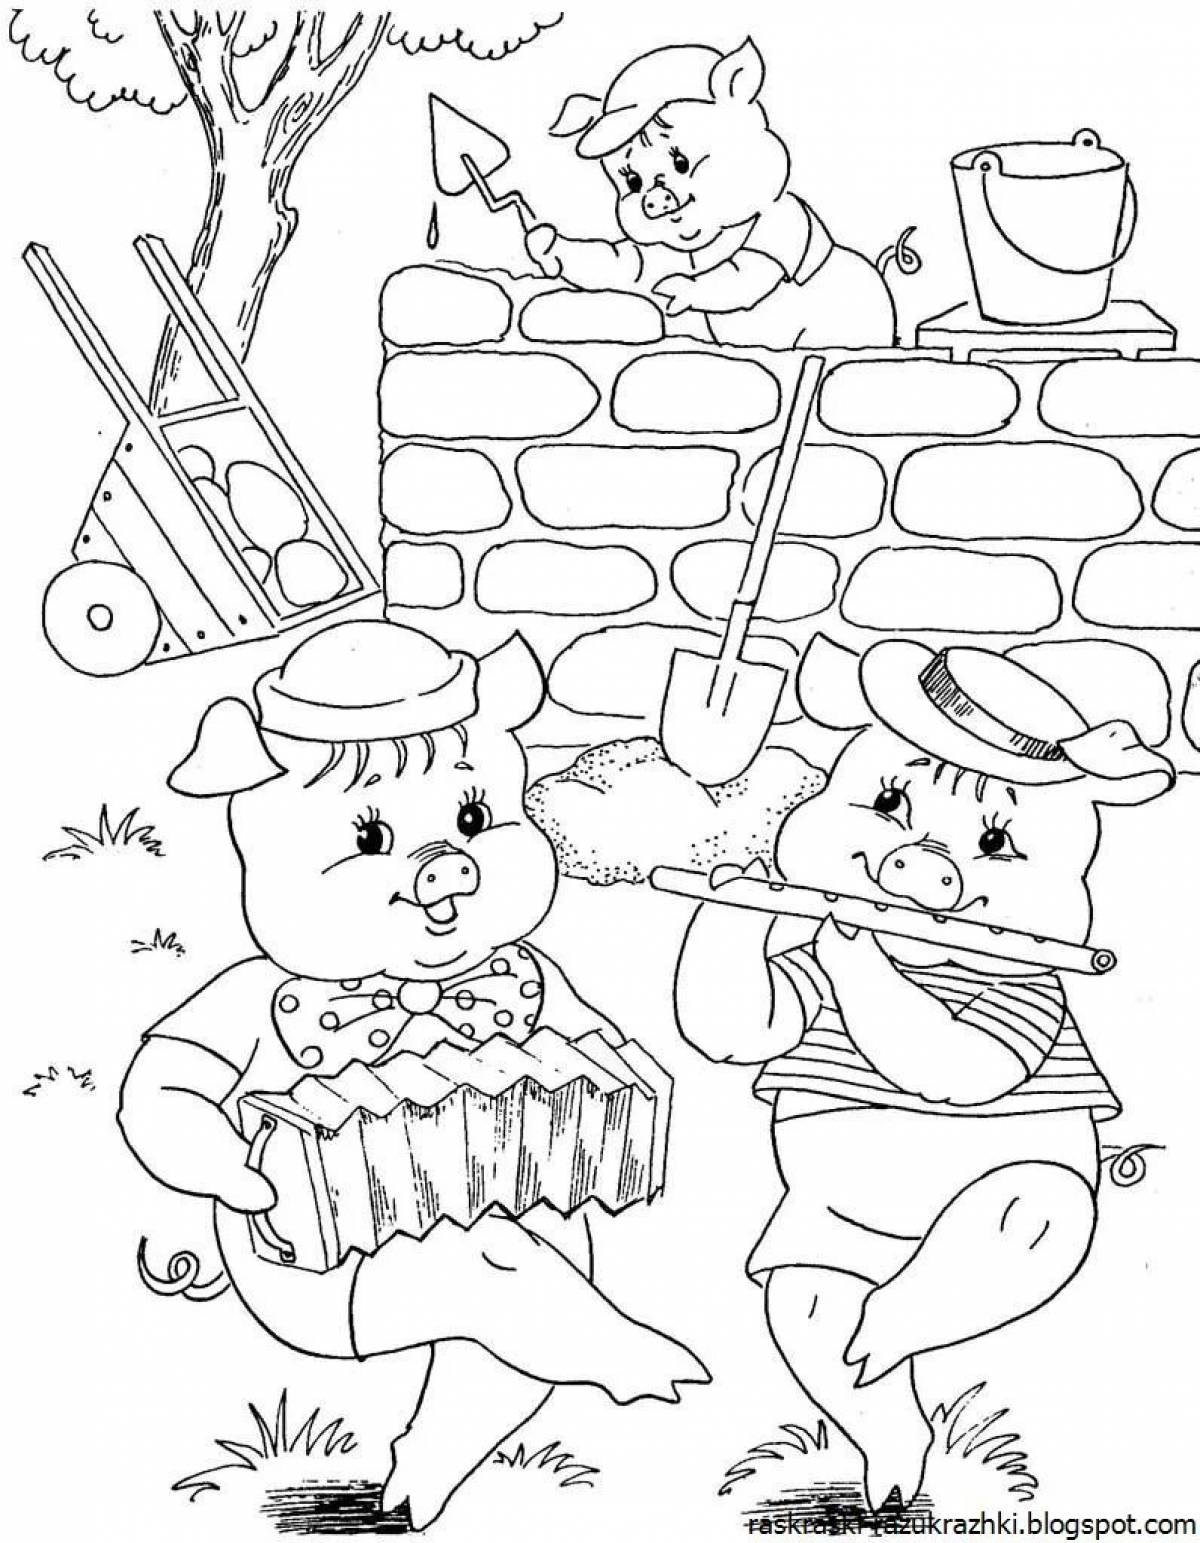 Radiant 3 pigs coloring book for children 3-4 years old